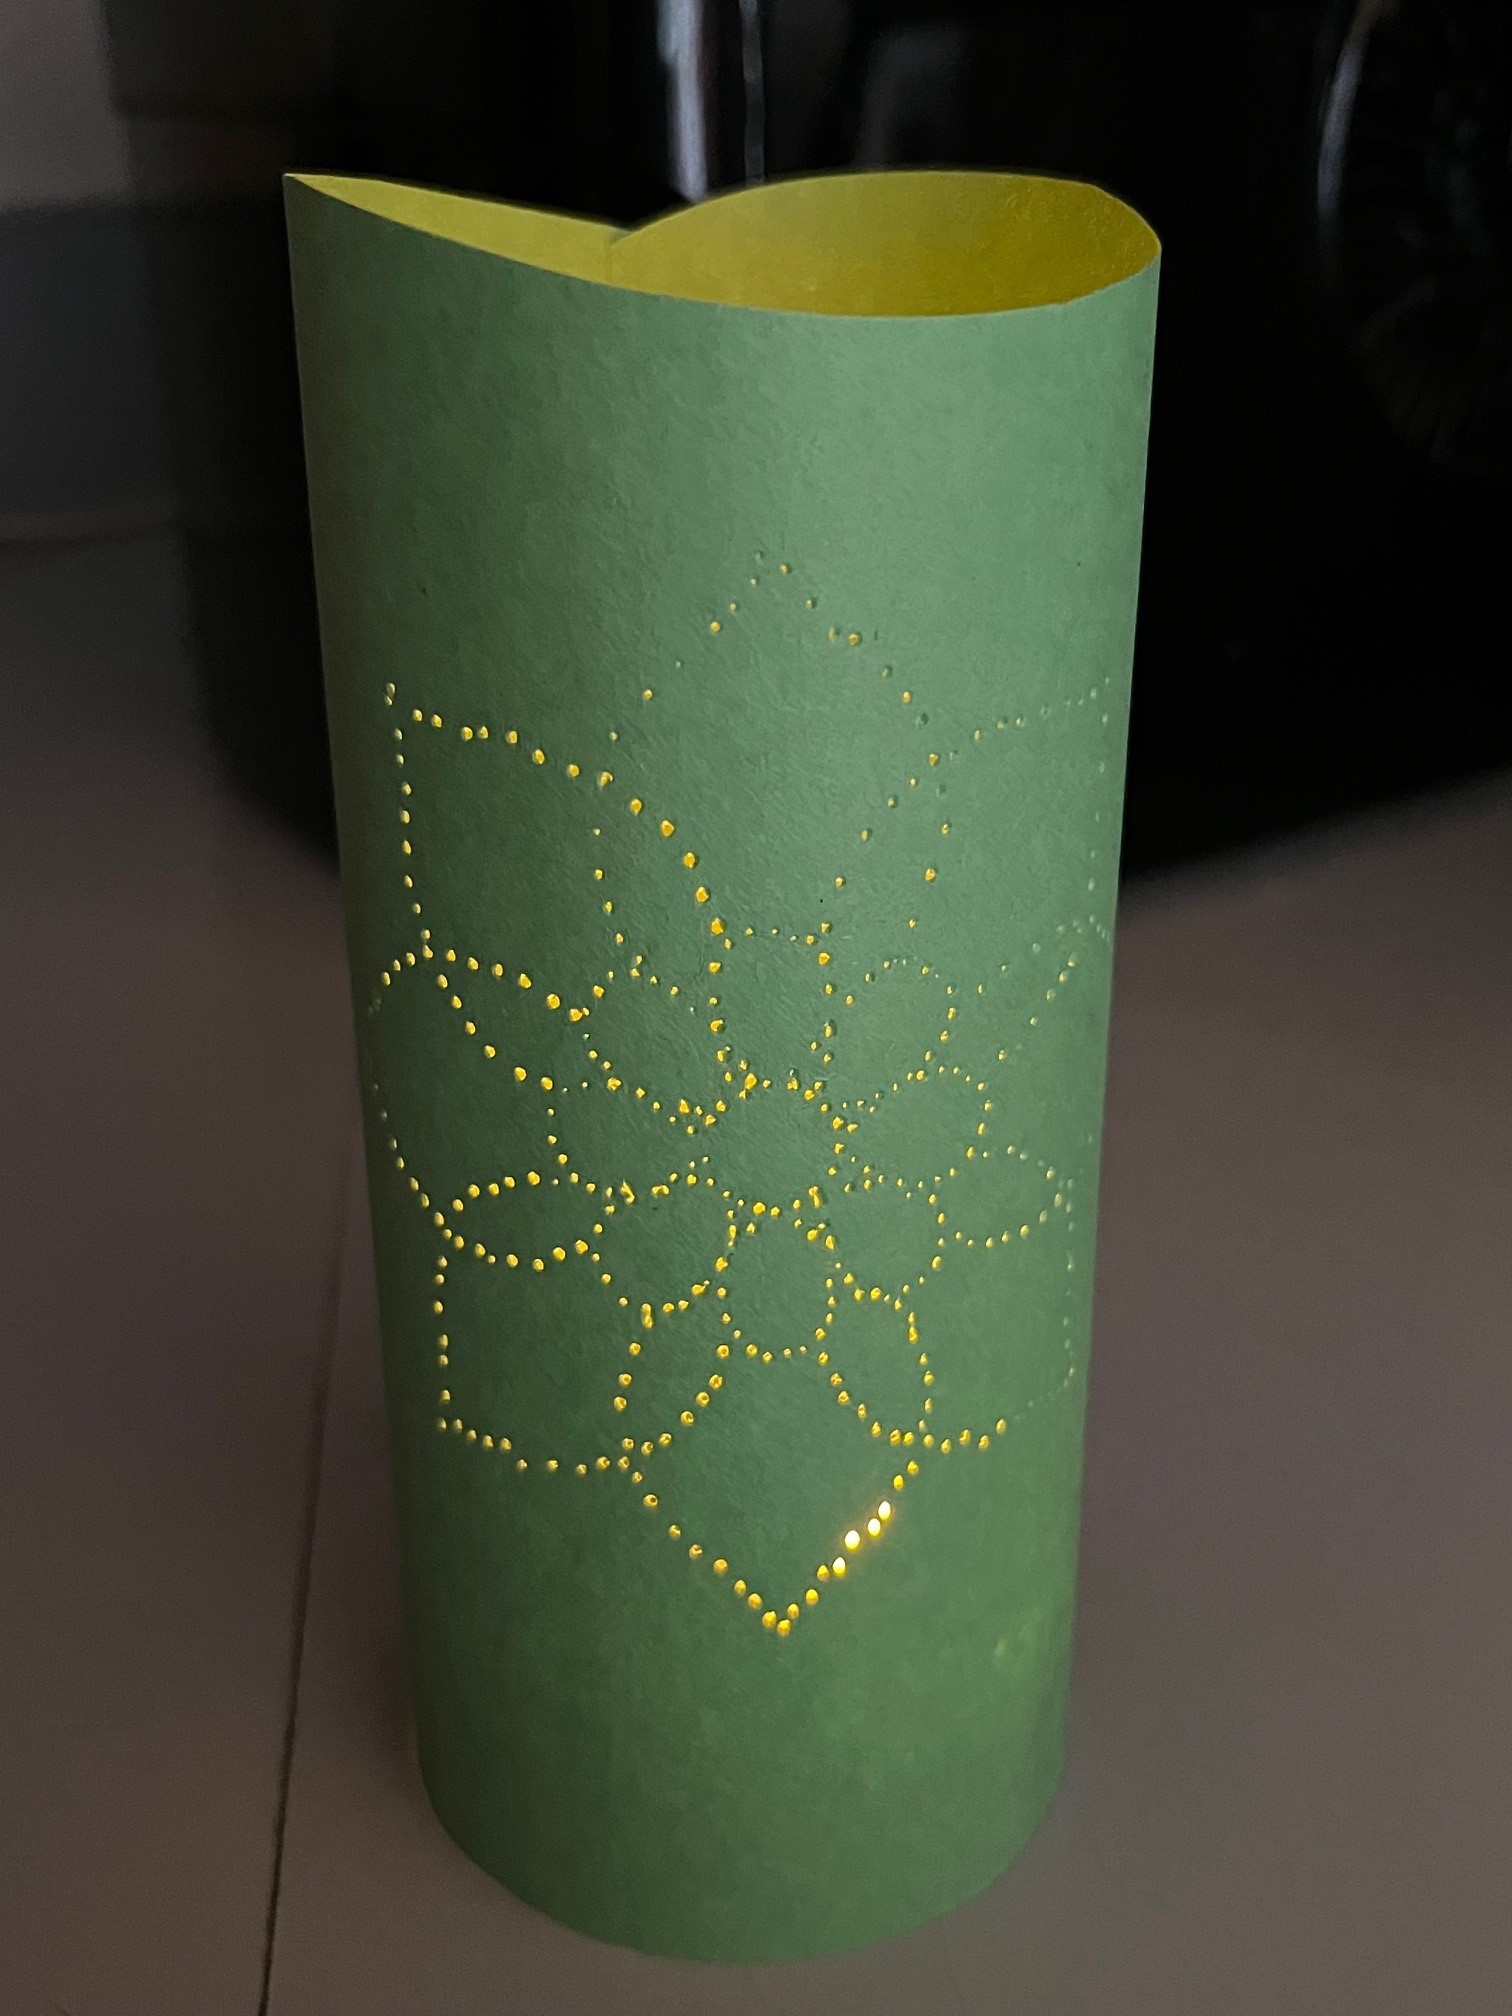 green paper with illuminated flower design